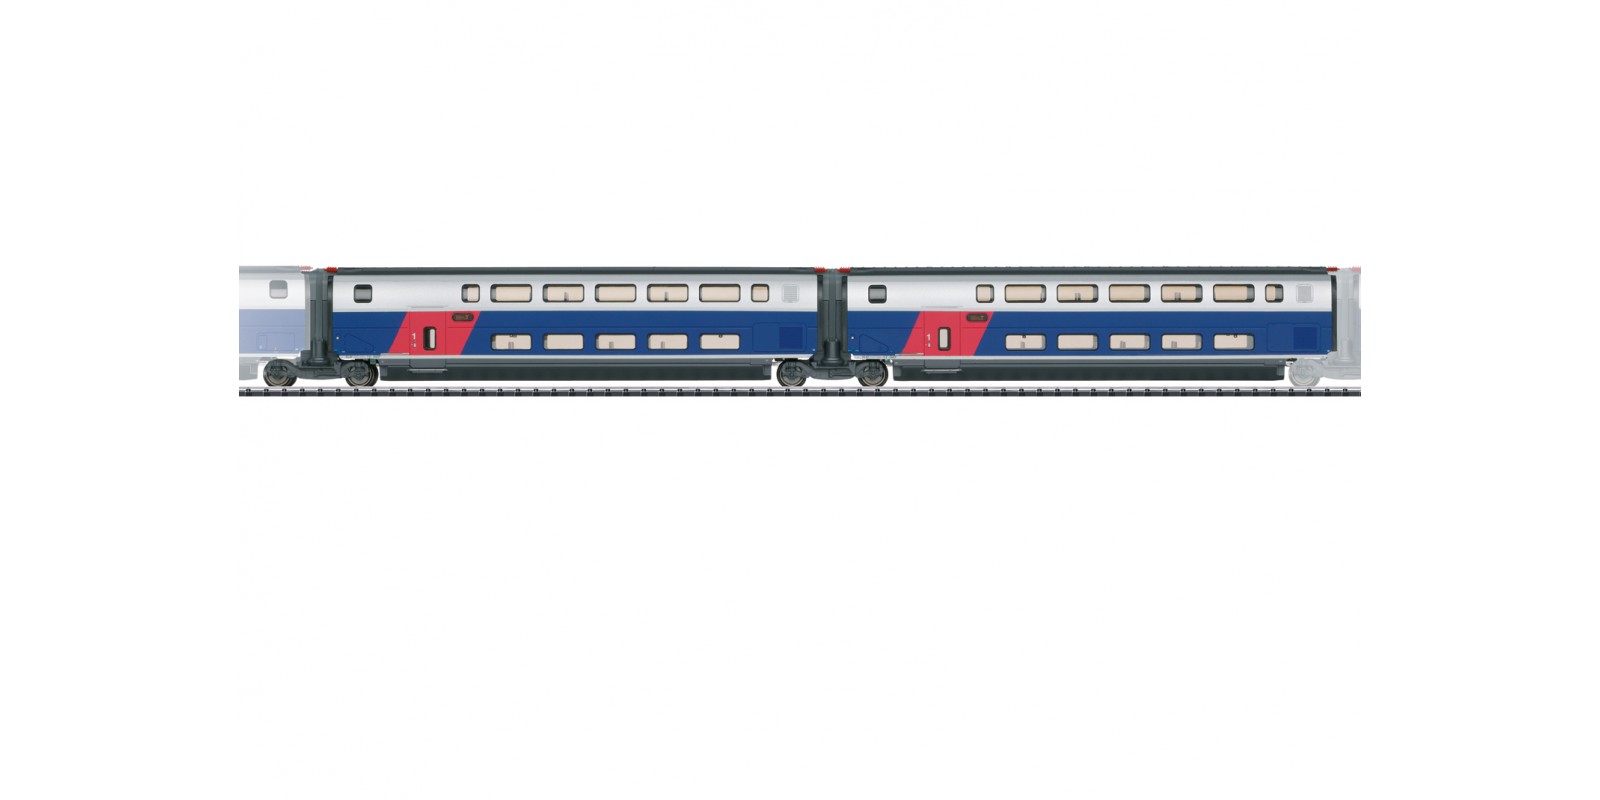 T23487 Add-On Car Set 1 for the TGV